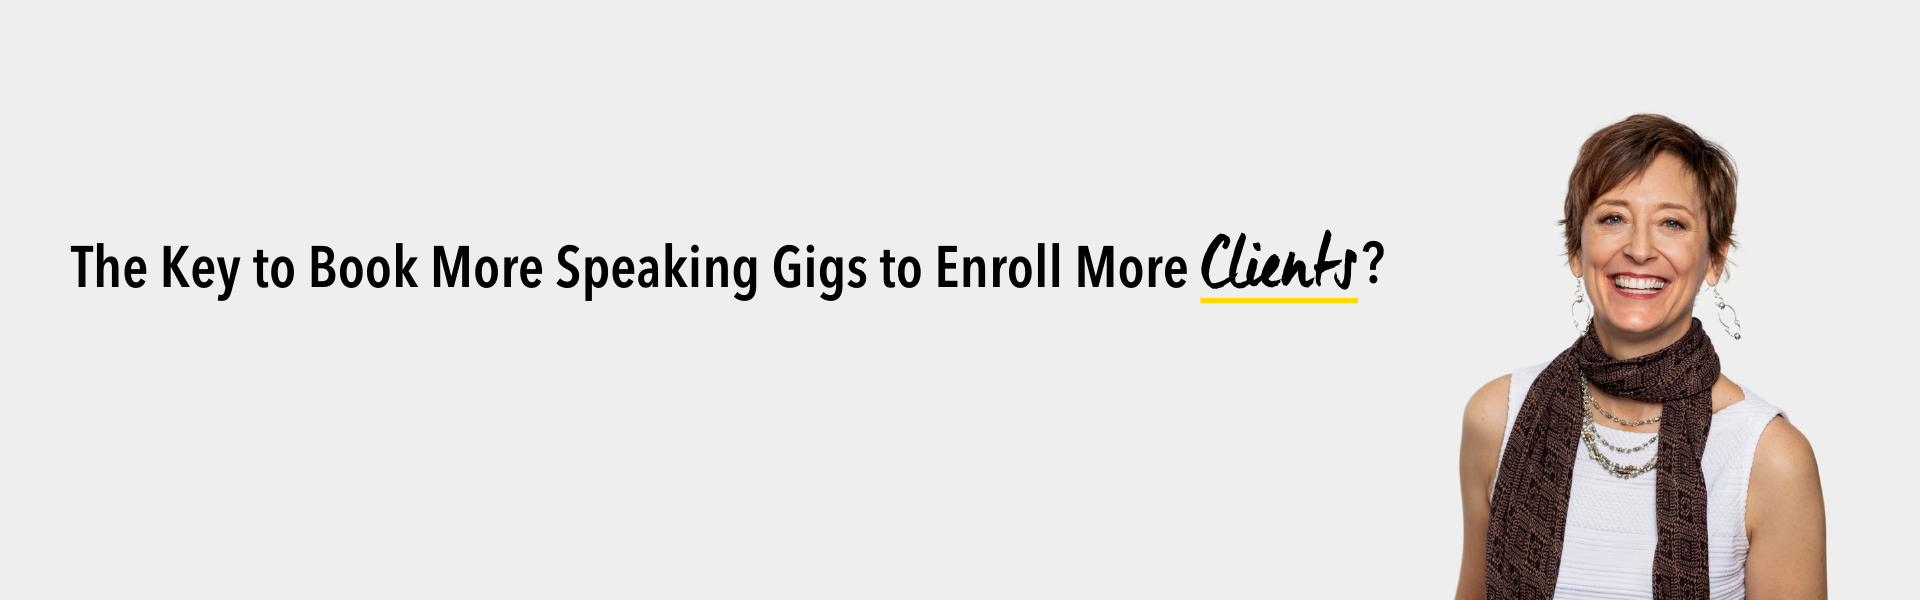 Banner - Book More Gigs and Enrolls More Clients (1920 × 600 px)